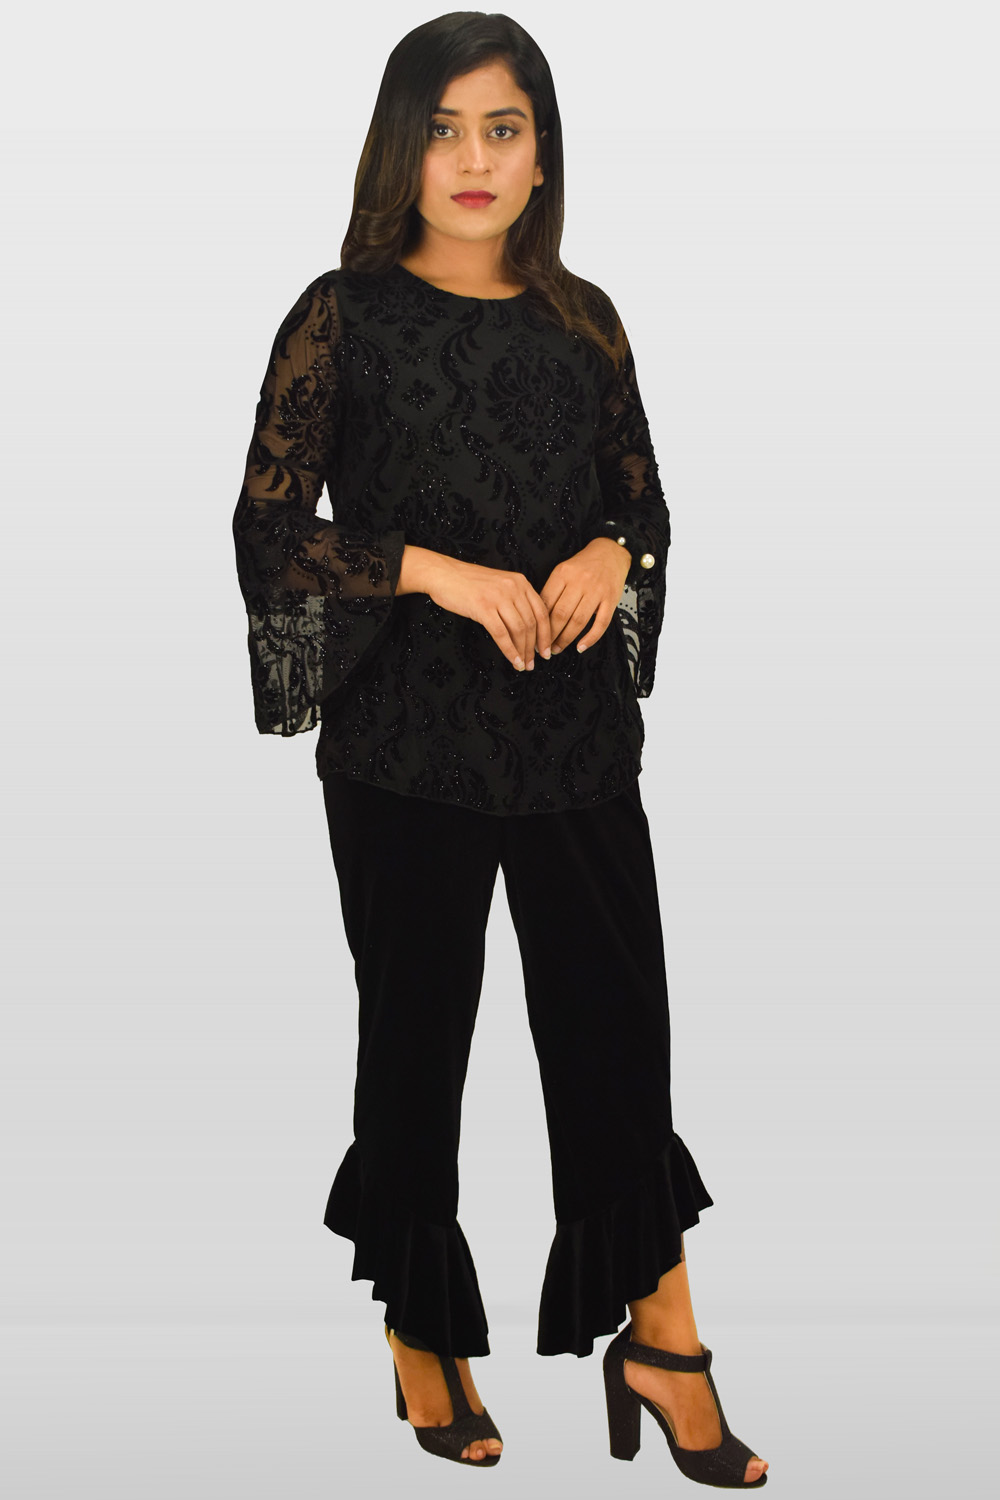 Black Lace Frill Long Sleeved Top